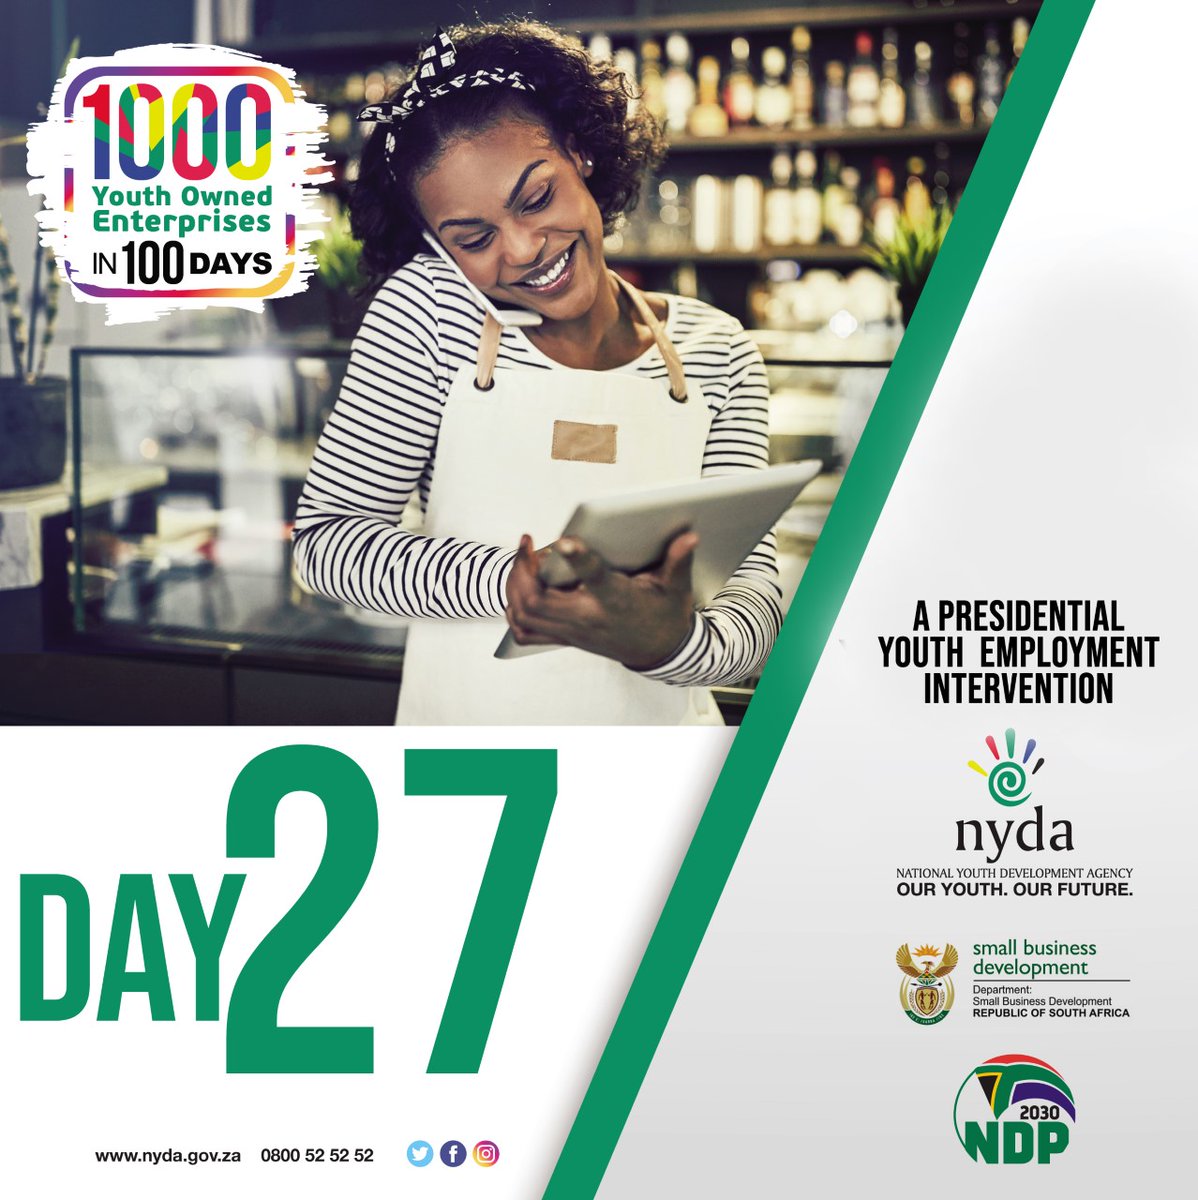 We are 27 days into the Presidential Youth Employment Intervention, to find out more, please feel free to enquire on any of our platforms. 

#GrowSA #1000YouthOwnedEnterprises #PresidentialYouthEmploymentIntervention